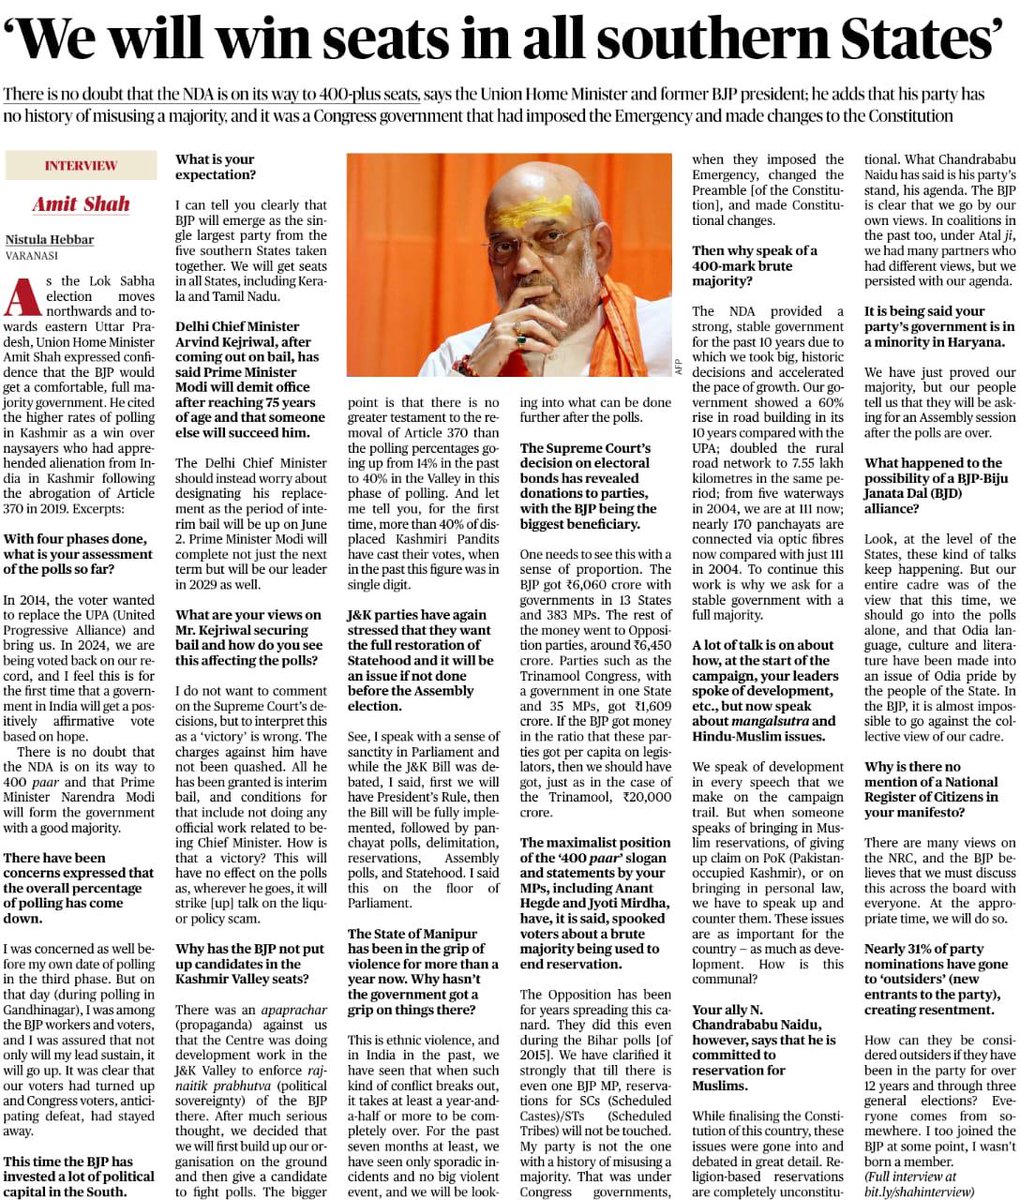 The turnout of BJP voters has not decreased. It is the opposition voters who have stayed away from voting, anticipating a defeat. Read my interview with @the_hindu.